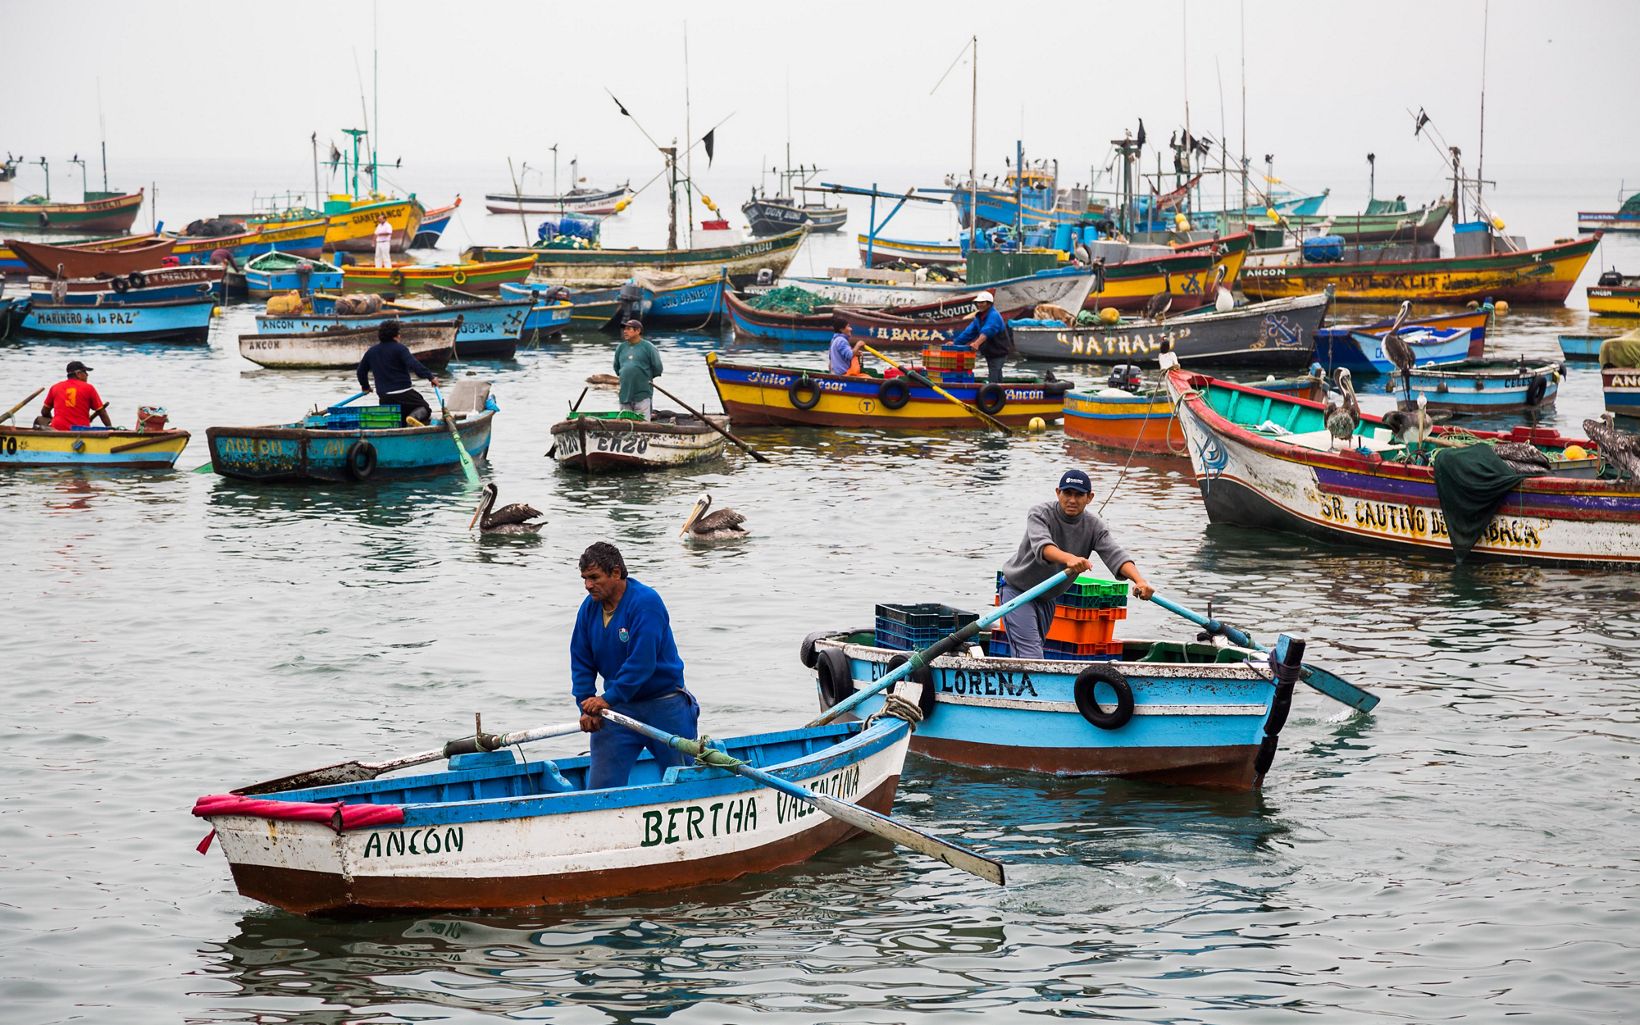 Fishermen set out to work in Ancón, Peru. Ancón is a small fishing town and seaside vacation destination about an hour north of Lima.  © Jason Houston